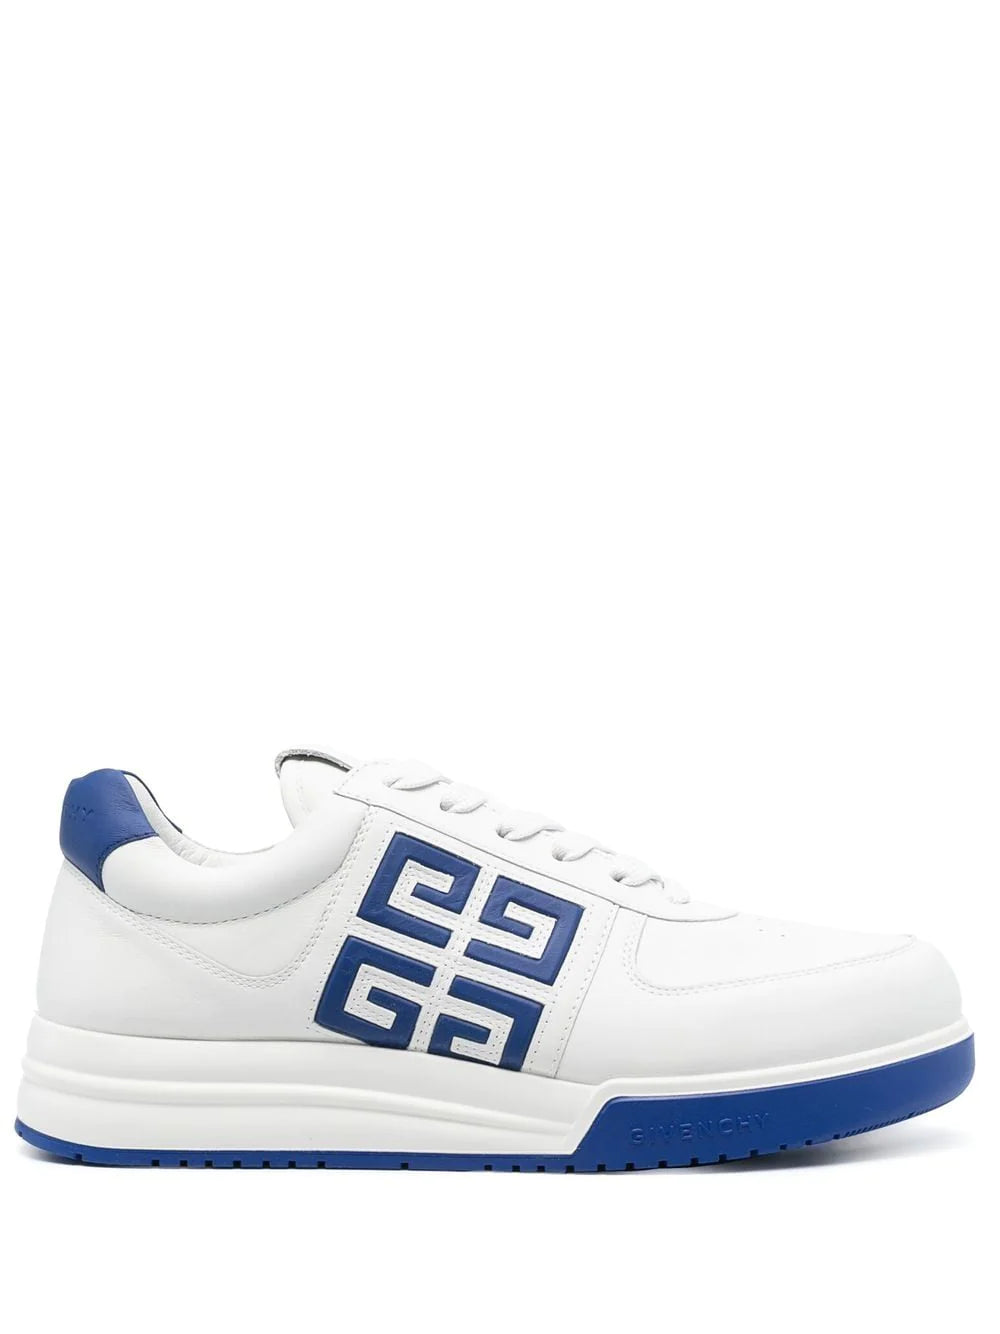 GIVENCHY Sneakers in pelle bianca